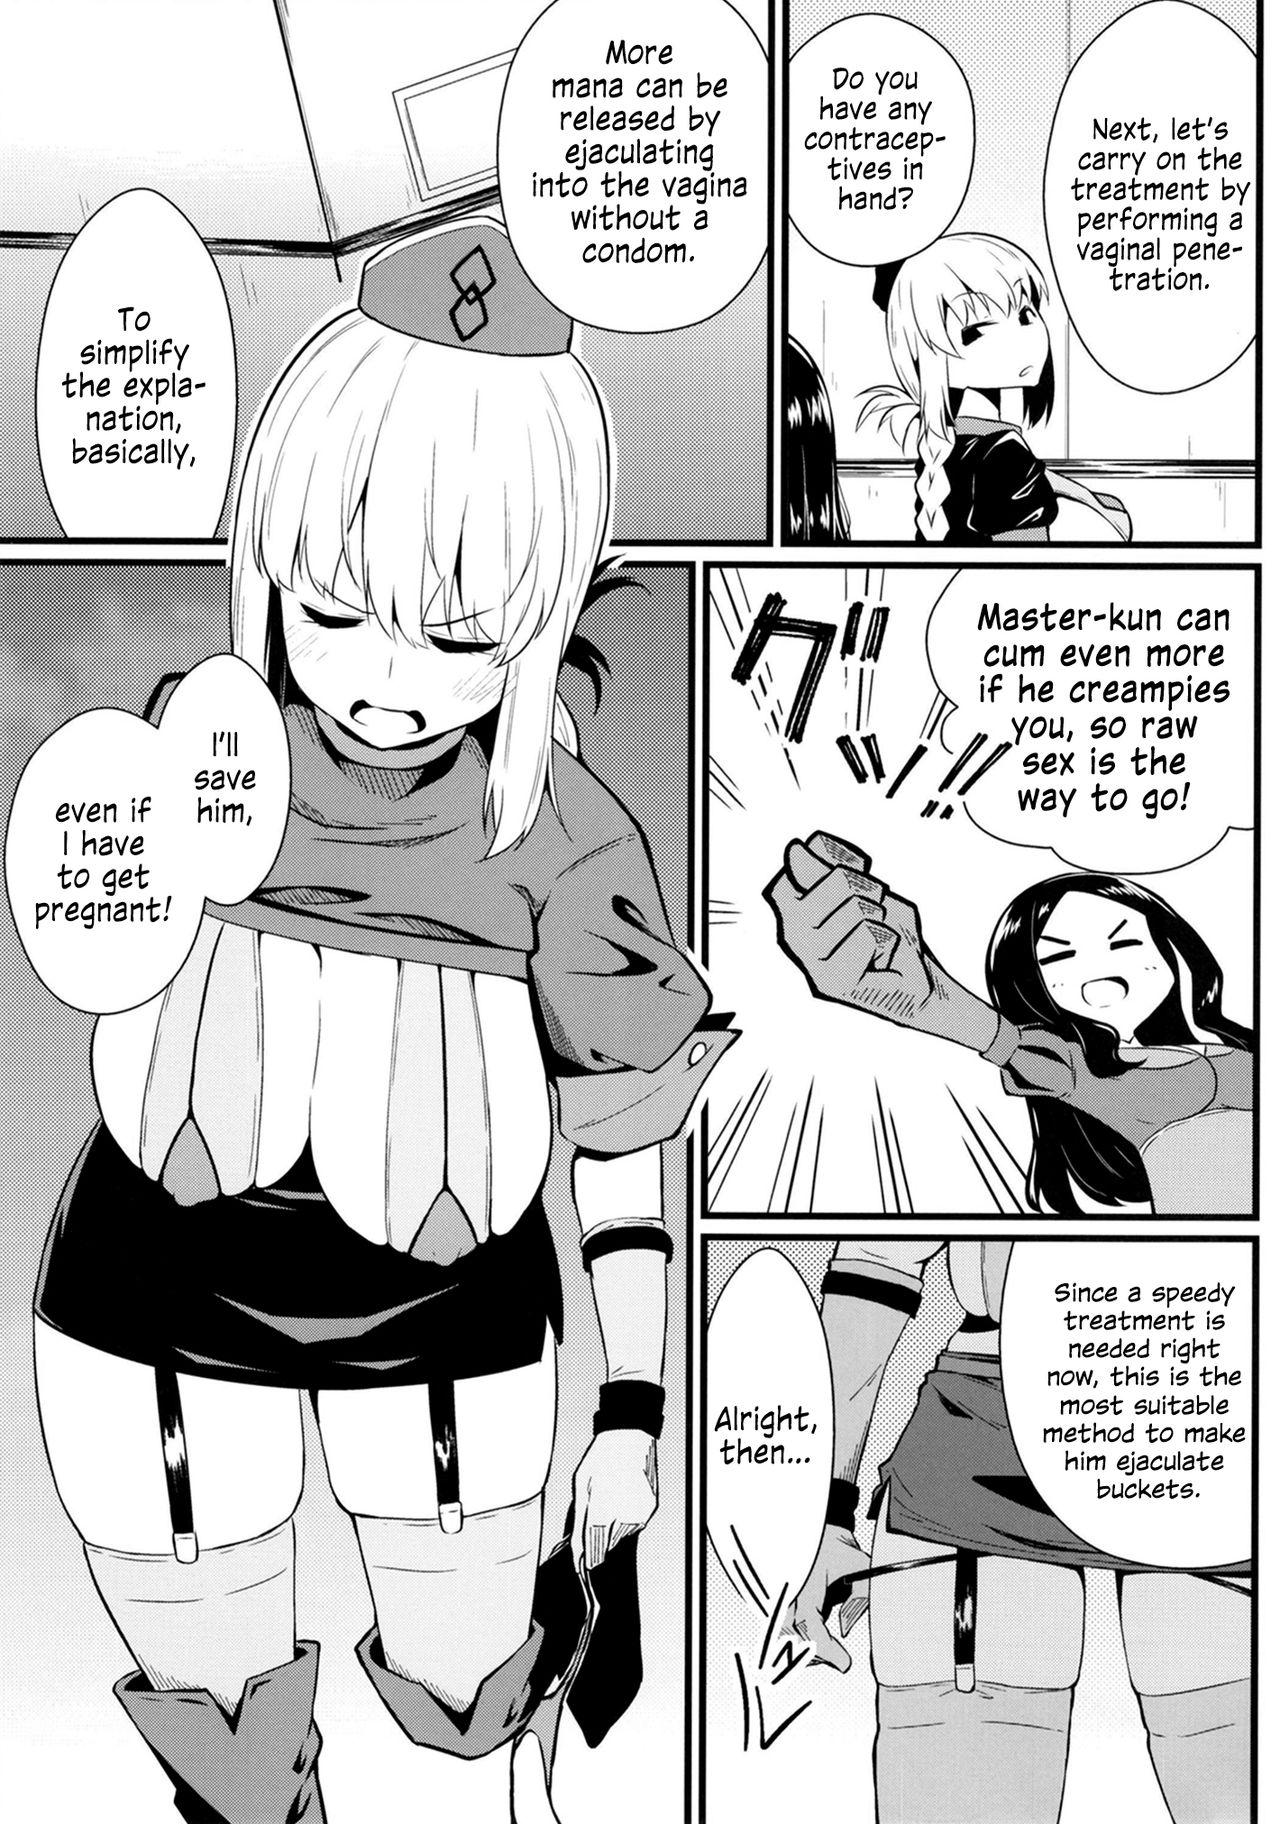 Missionary Position Porn Master Bousou - Fate grand order Interracial Hardcore - Page 9